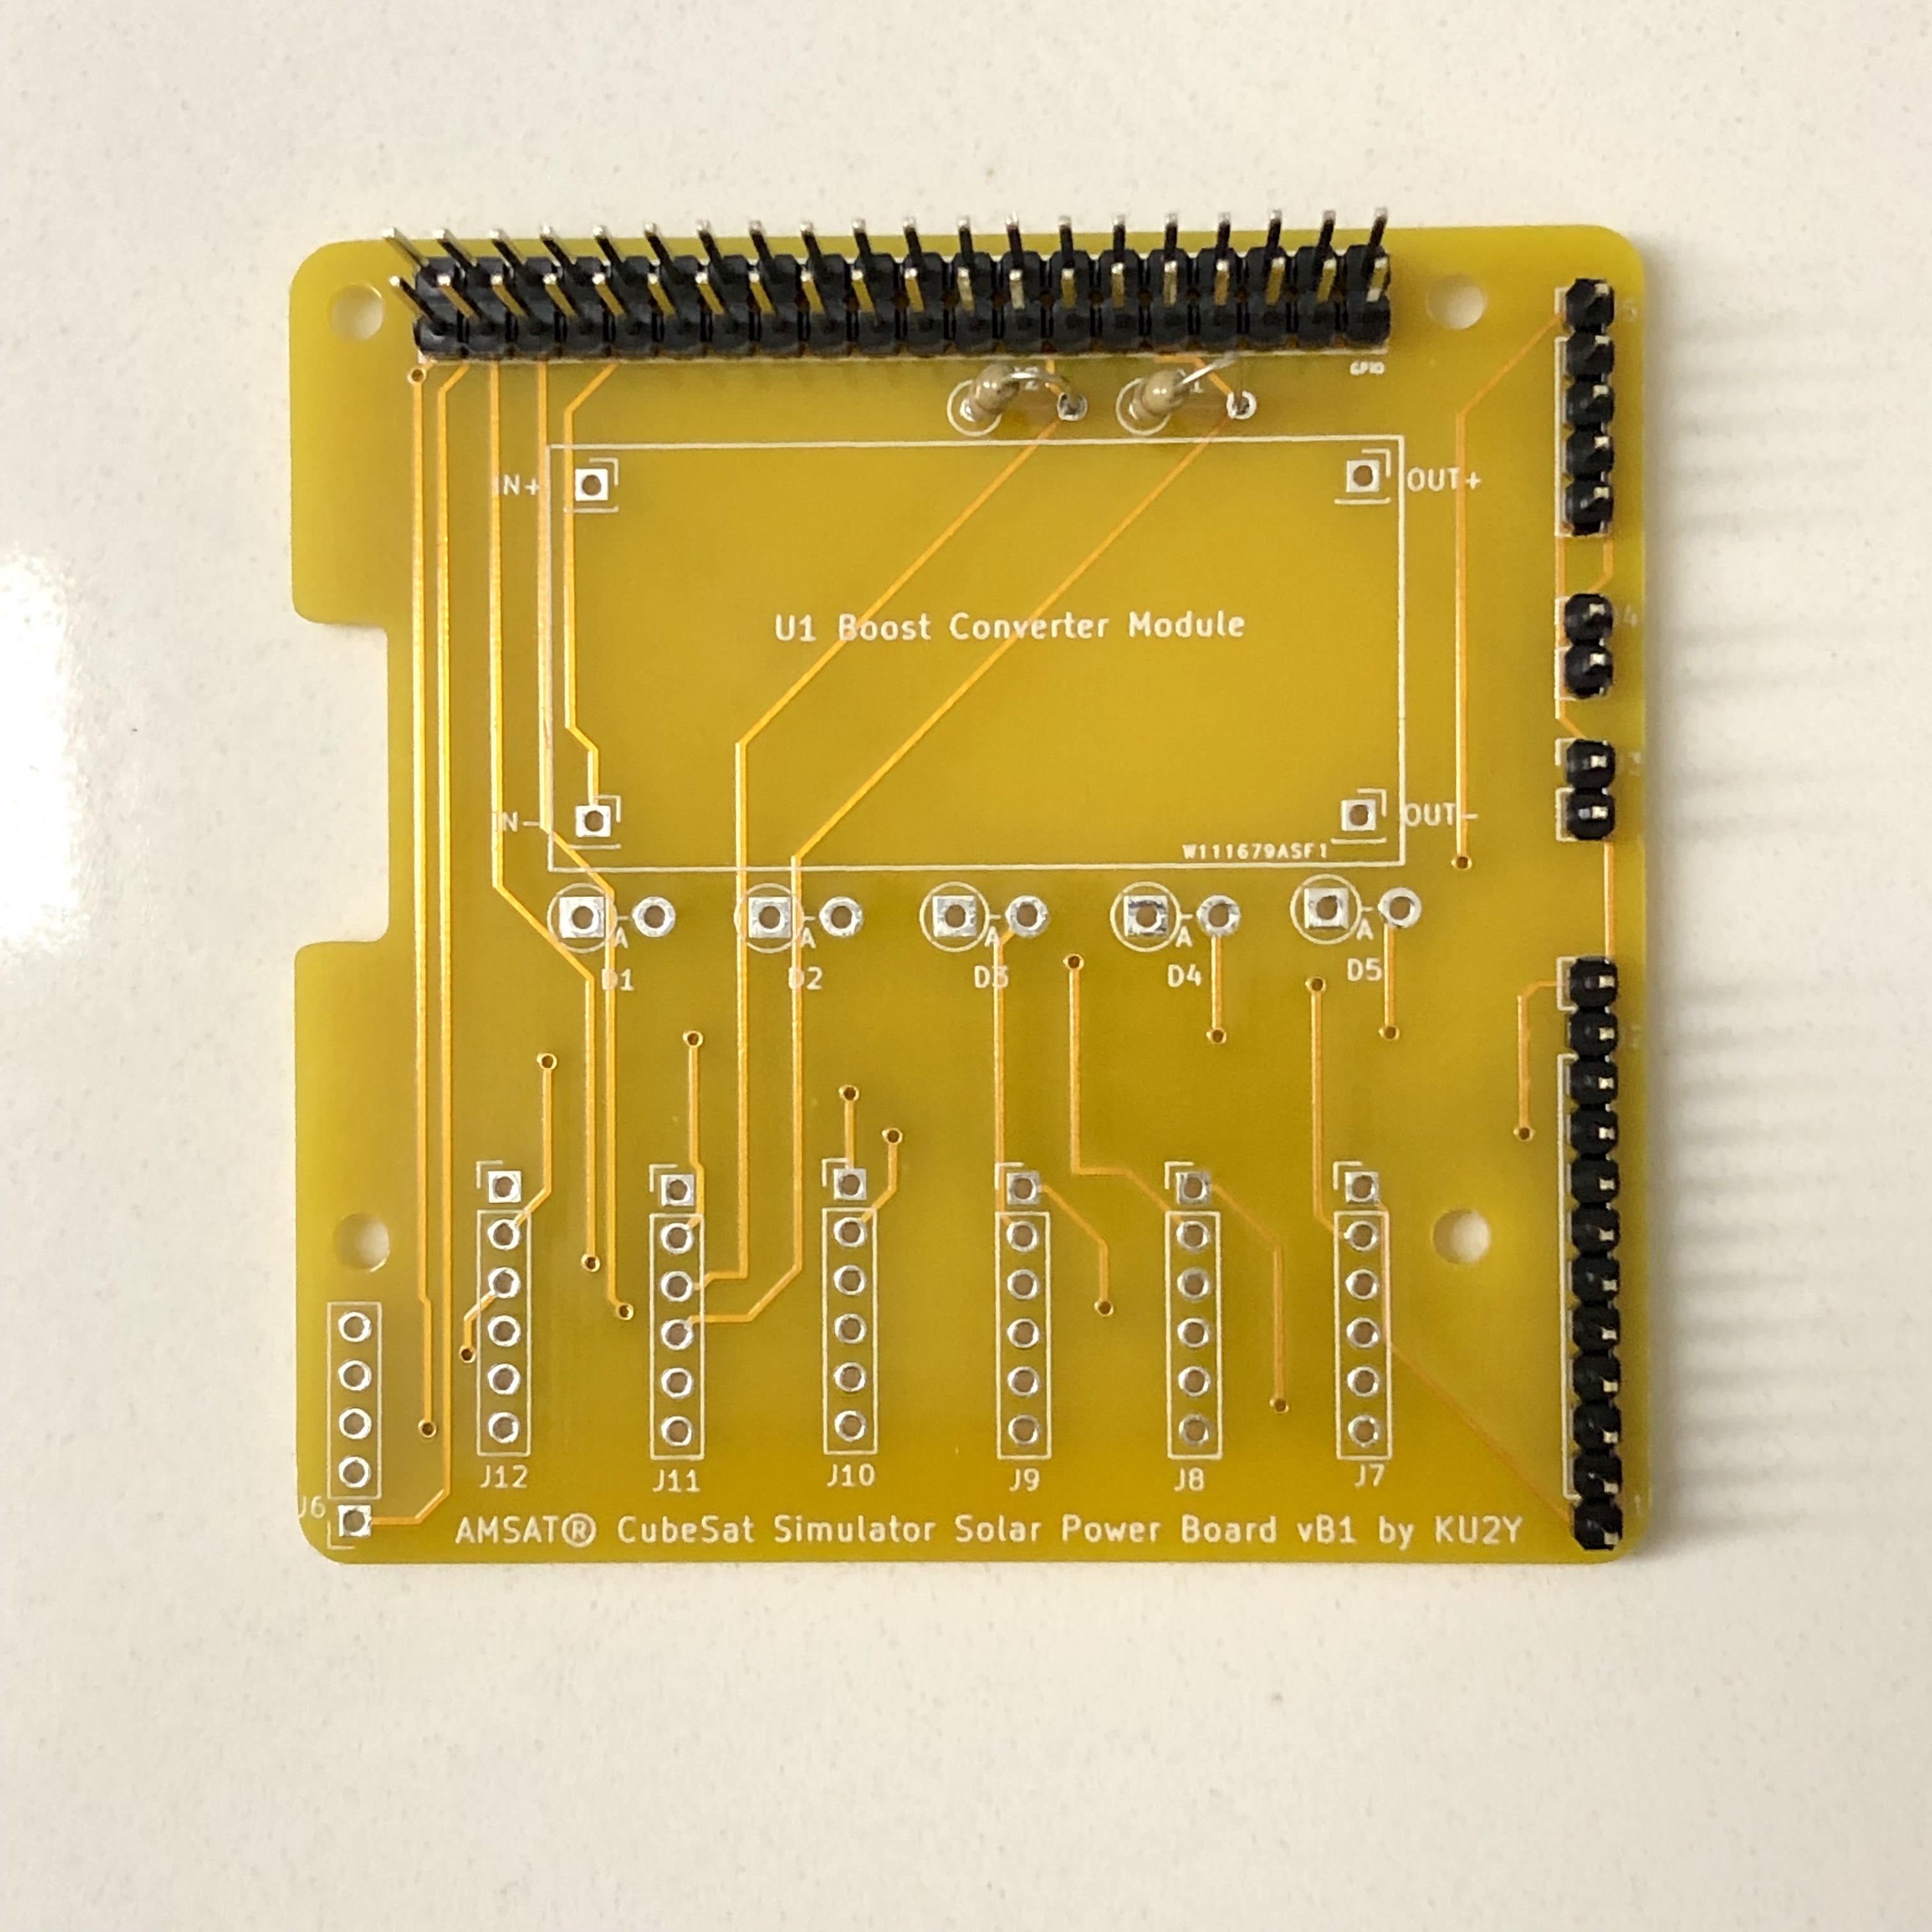 PCB with R1 and R2 installed